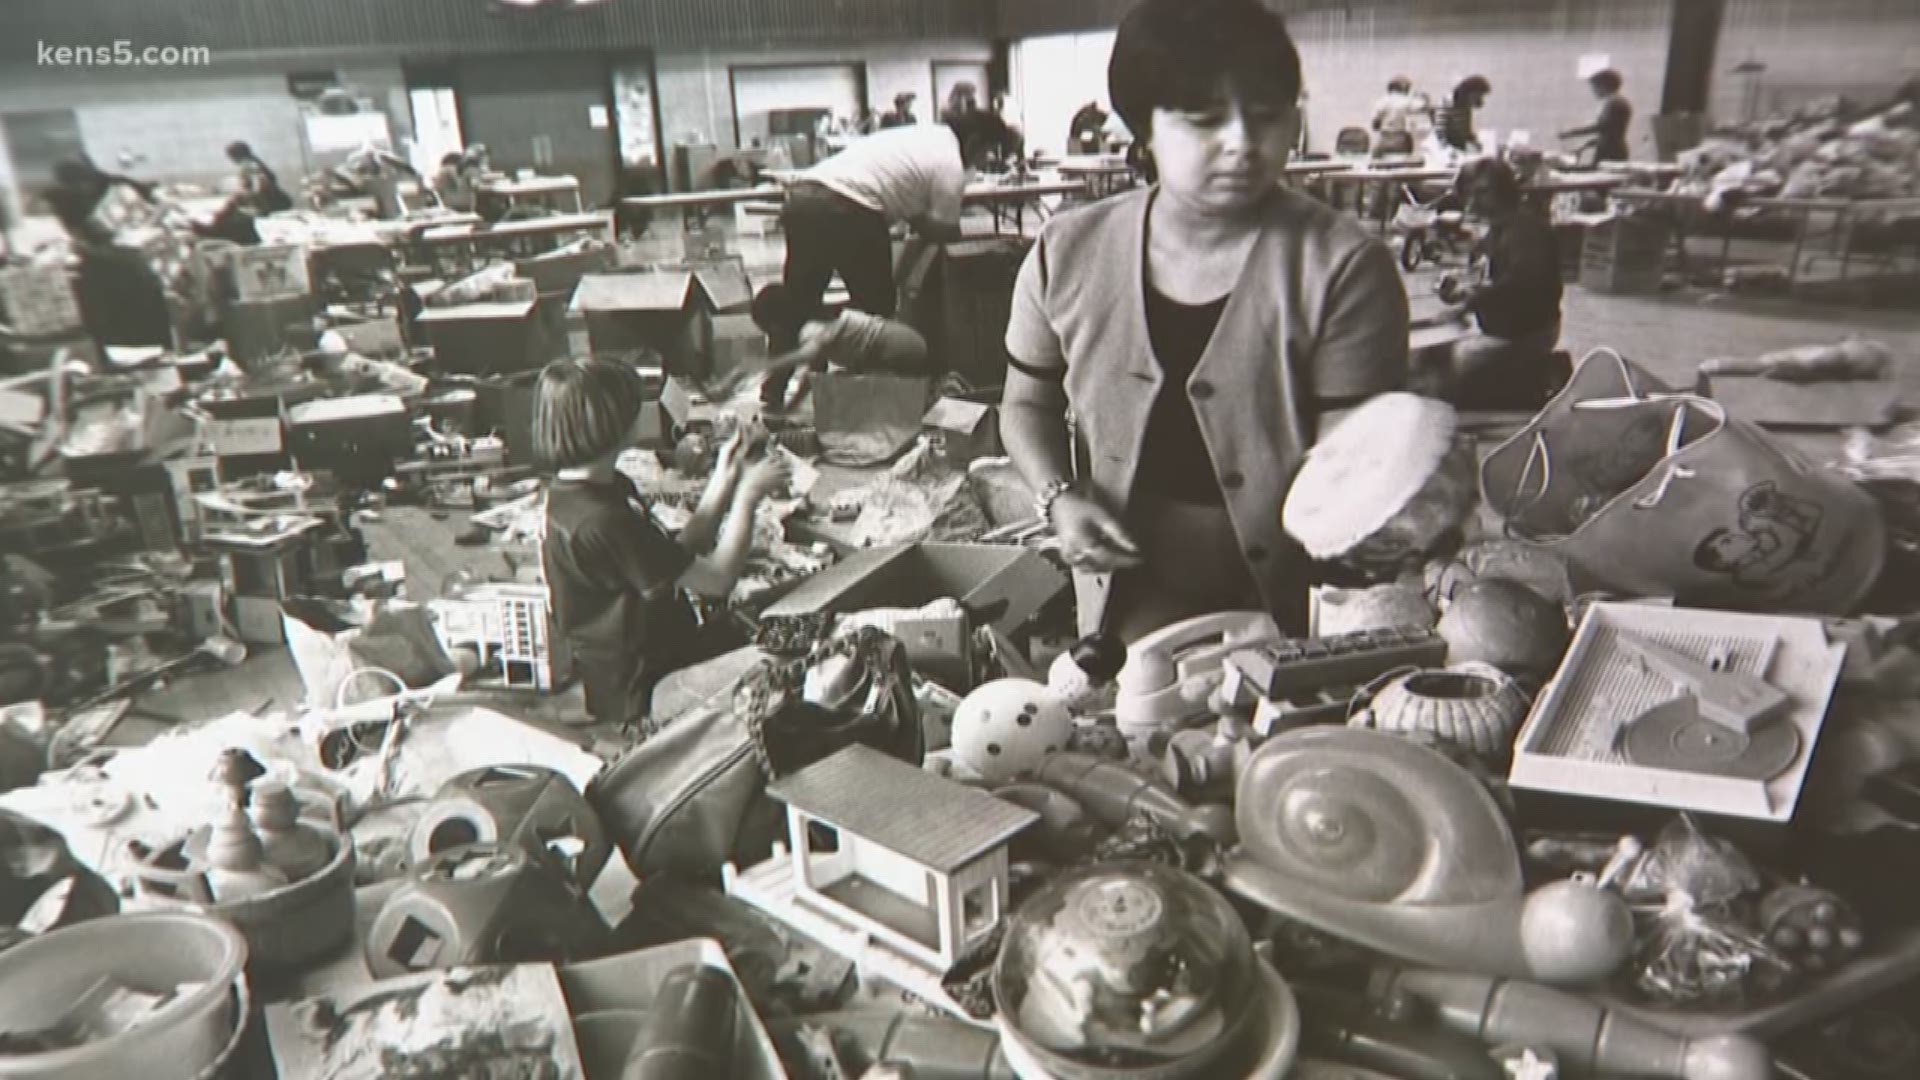 50 years ago, one San Antonian thought she'd do her part to help needy kids at Christmas. Now, dozens of Santas help hand out thousands of dollars worth of gifts every year in the ongoing initiative.